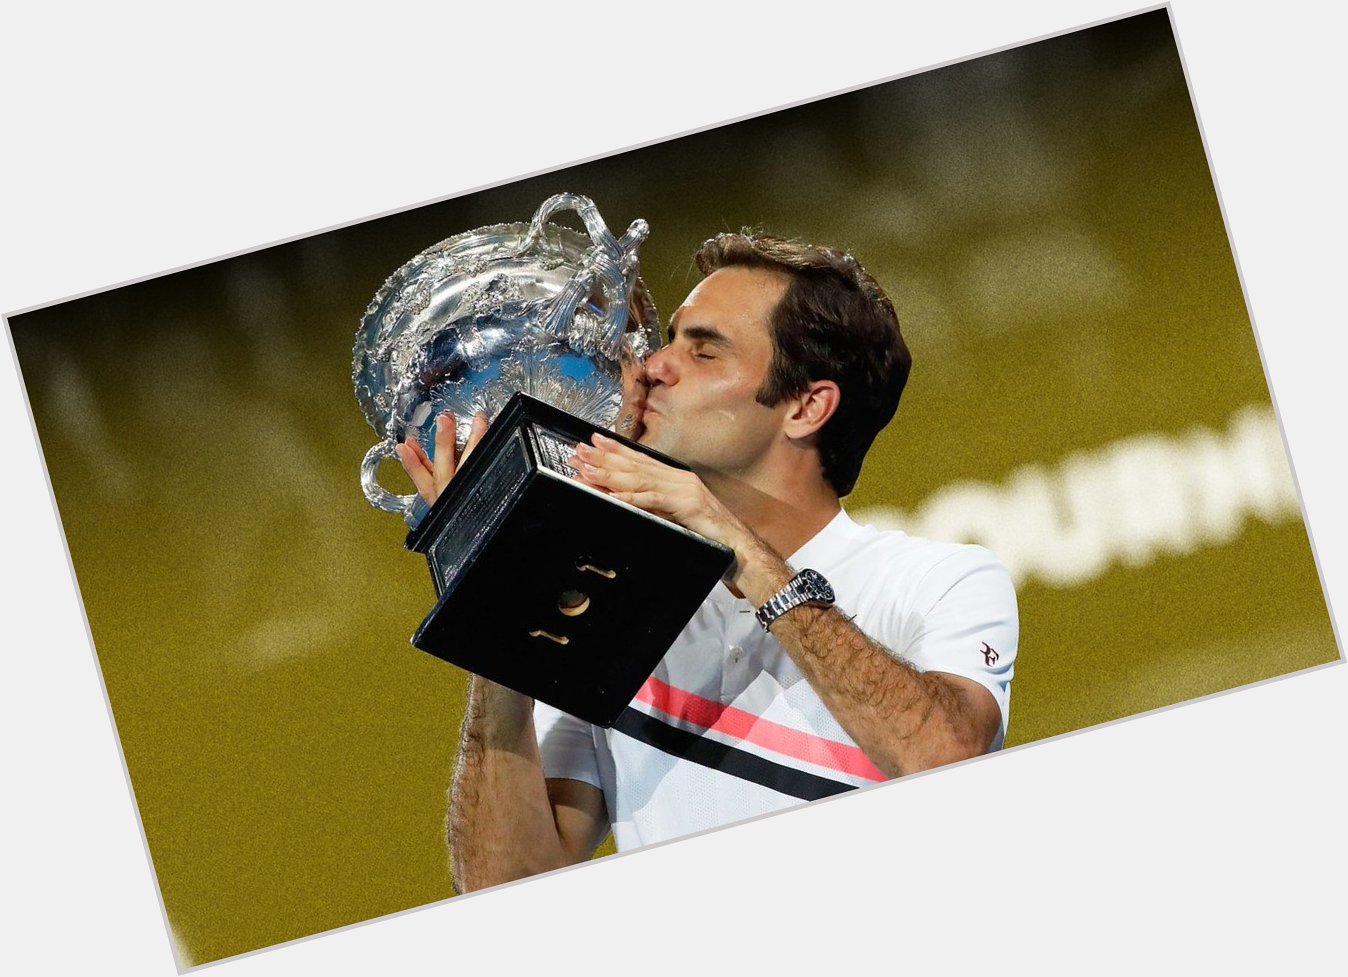  When you re good at something, make that everything. - Roger Federer
Happy birthday 